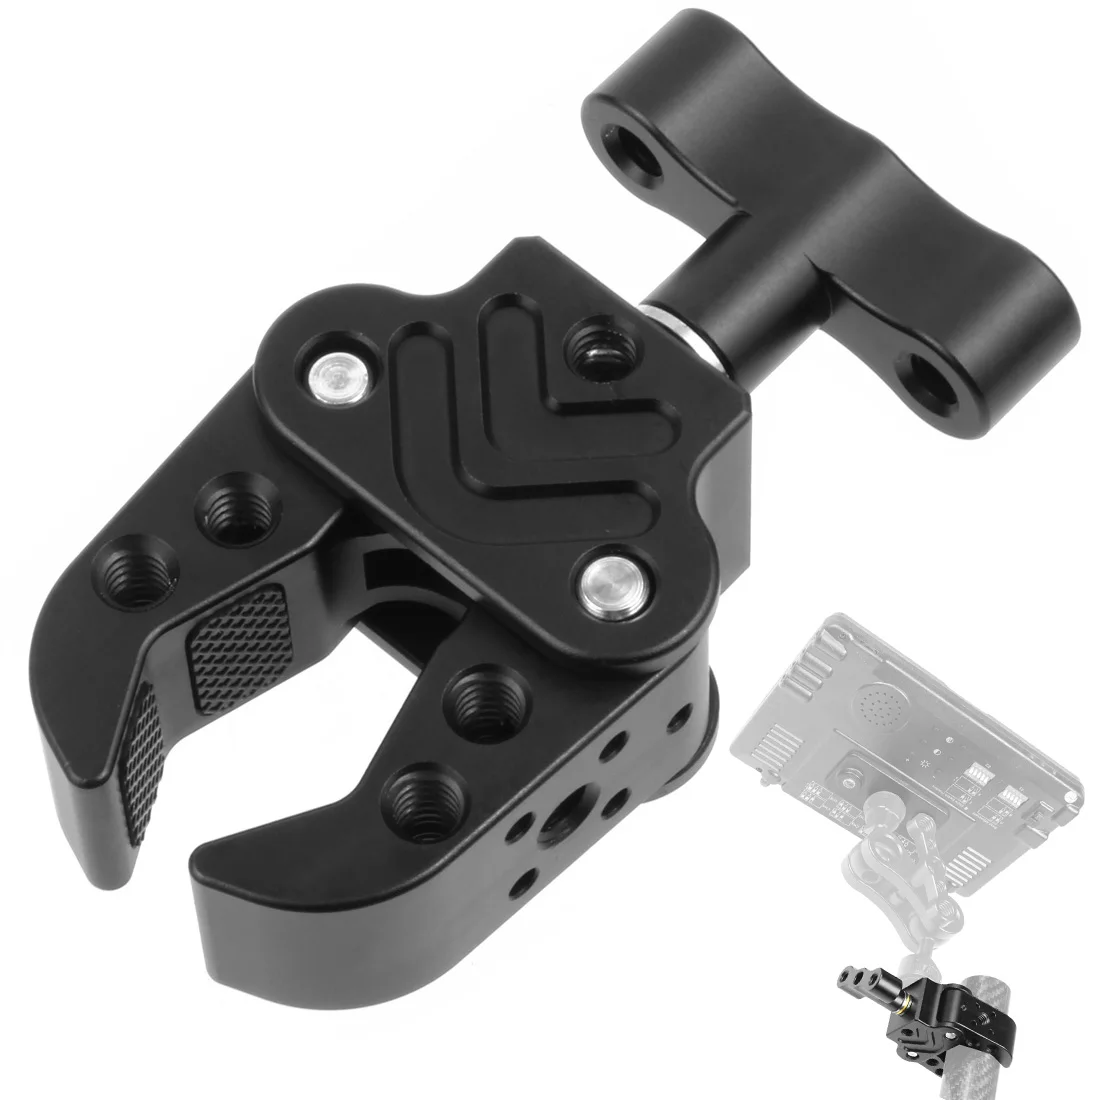 Cameras Articulating Magic Arm Double 1/4 Ball Head Connect Adapter Crab Clamp 3/8 Mount for Lights Field Monitor Camera Stand Bracket